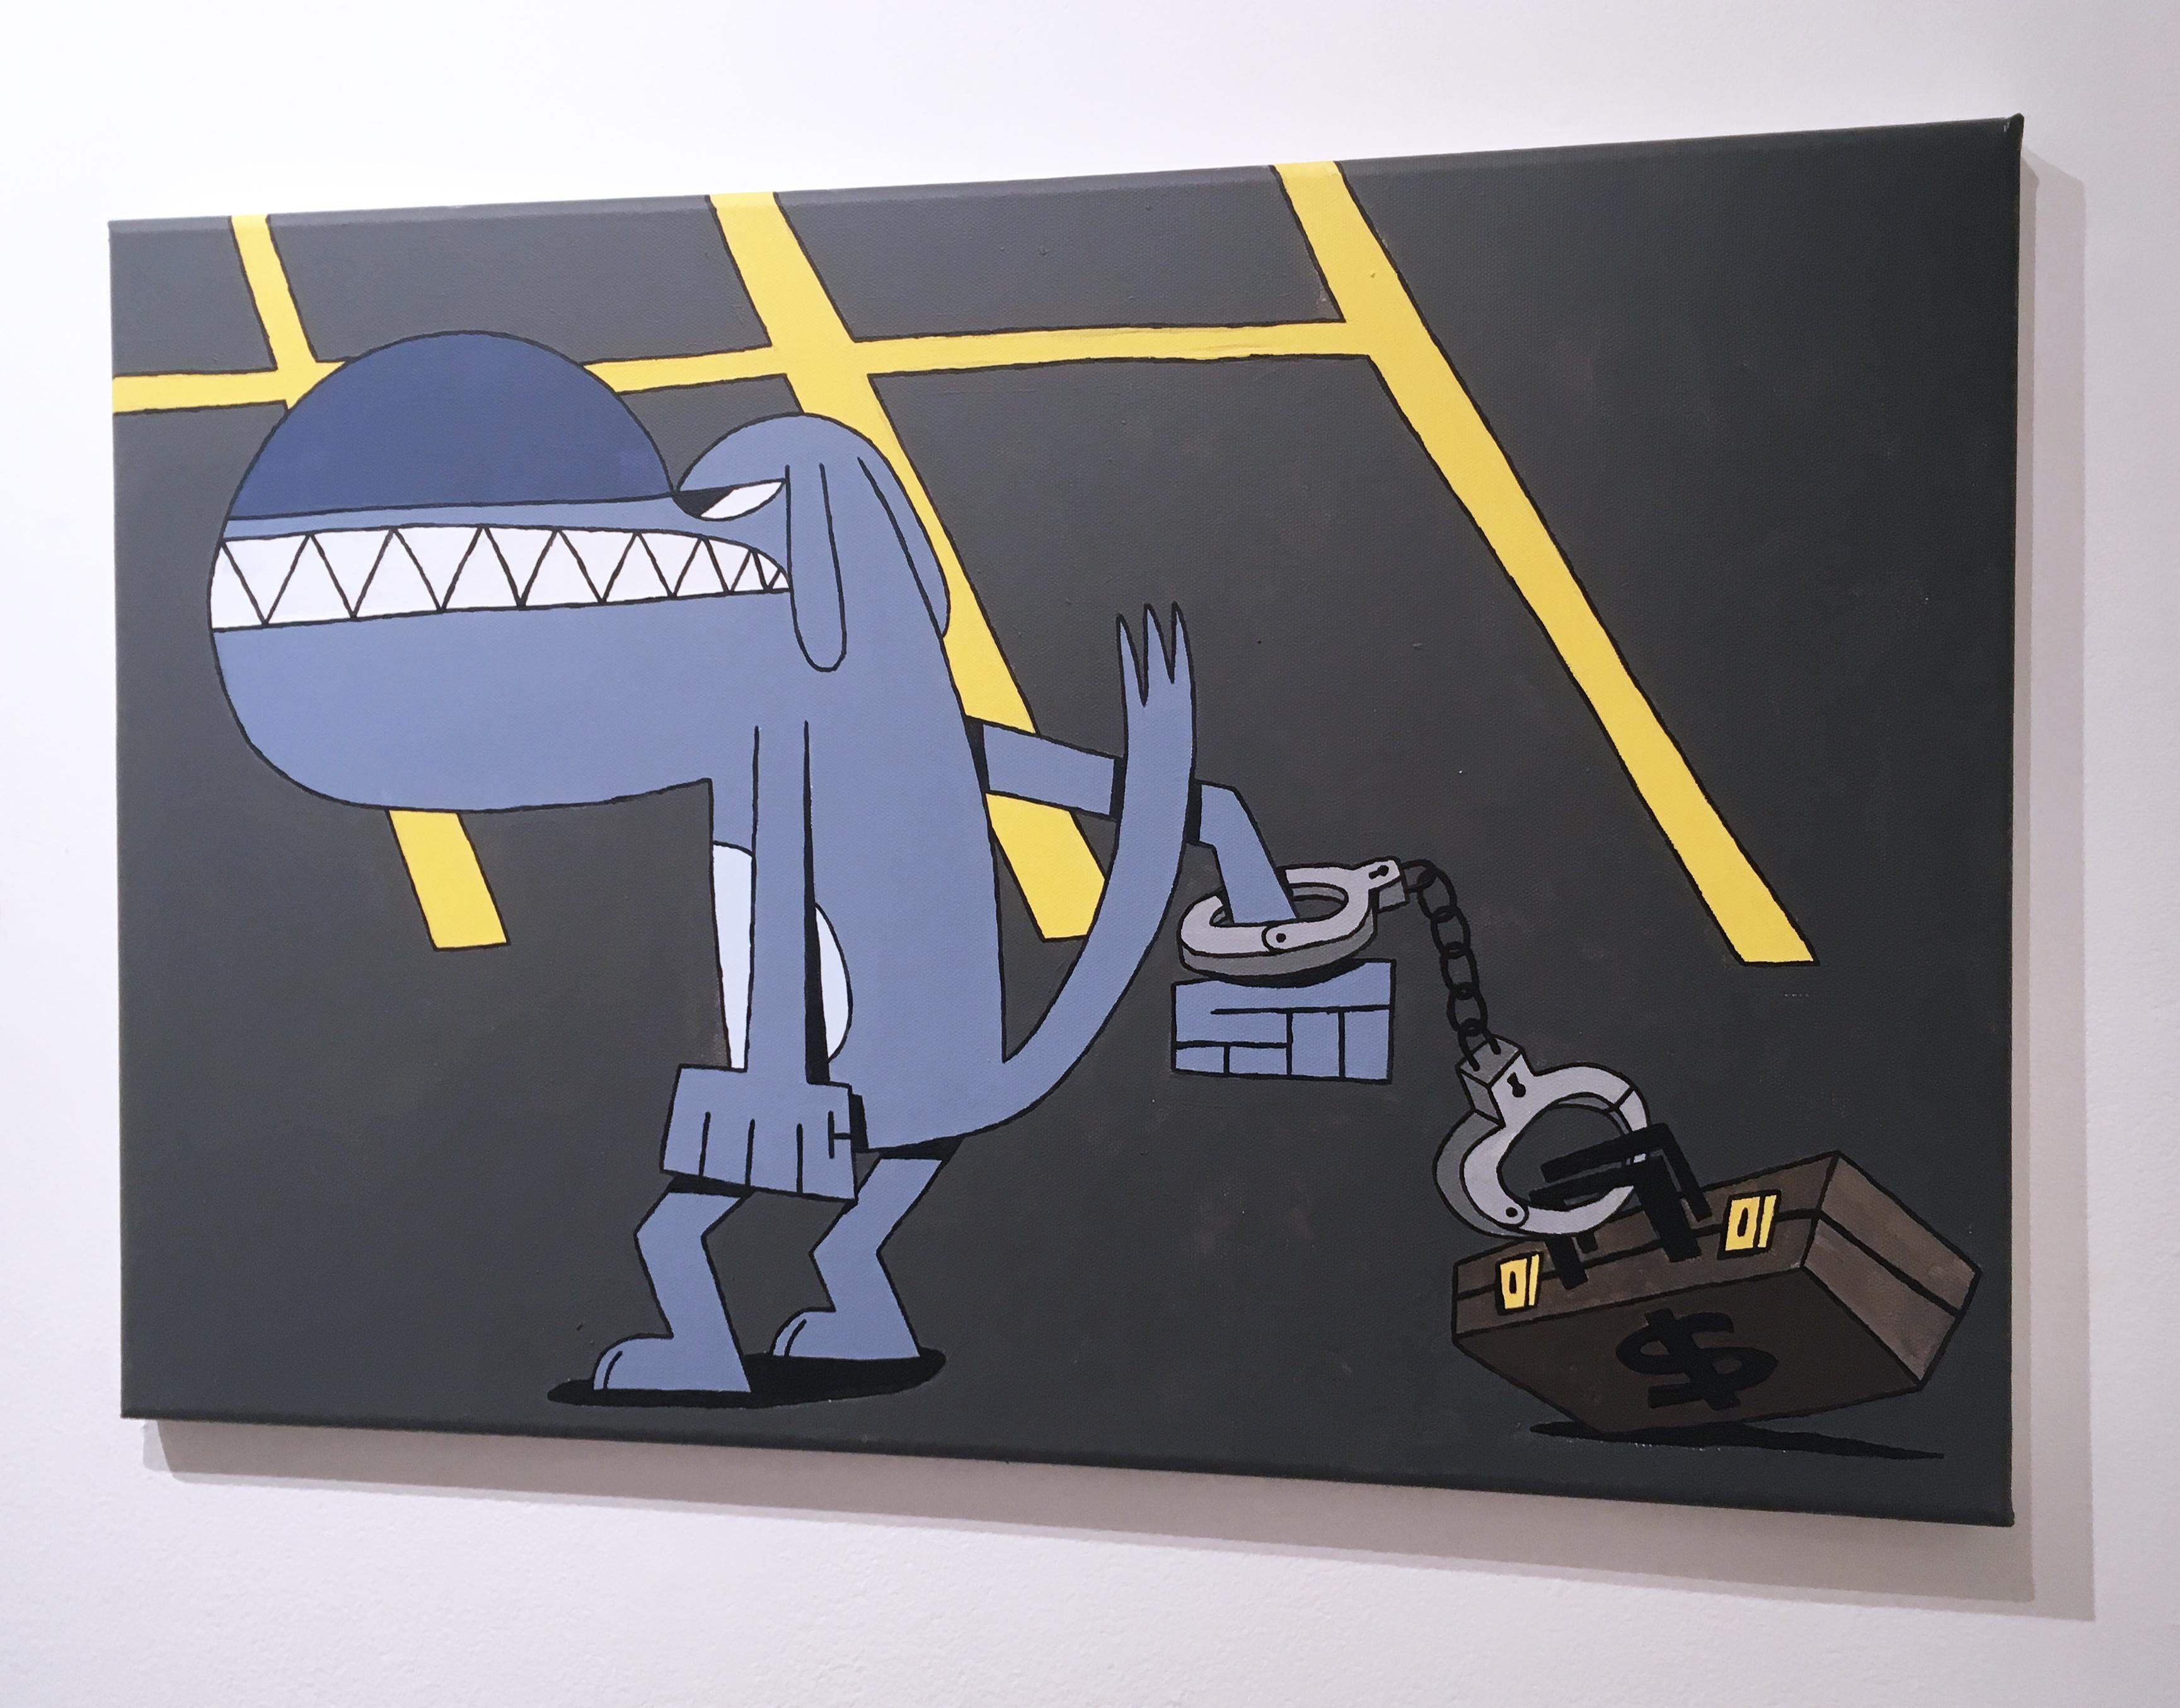 Cuffed to the Game by BARC the dog, acrylic on canvas pop art comic book animal character, charcoal gray and silver, light blue, stone blue, bold yellow, black and white, saturated colors

BARC the dog stands in a parking lot with yellow lines to